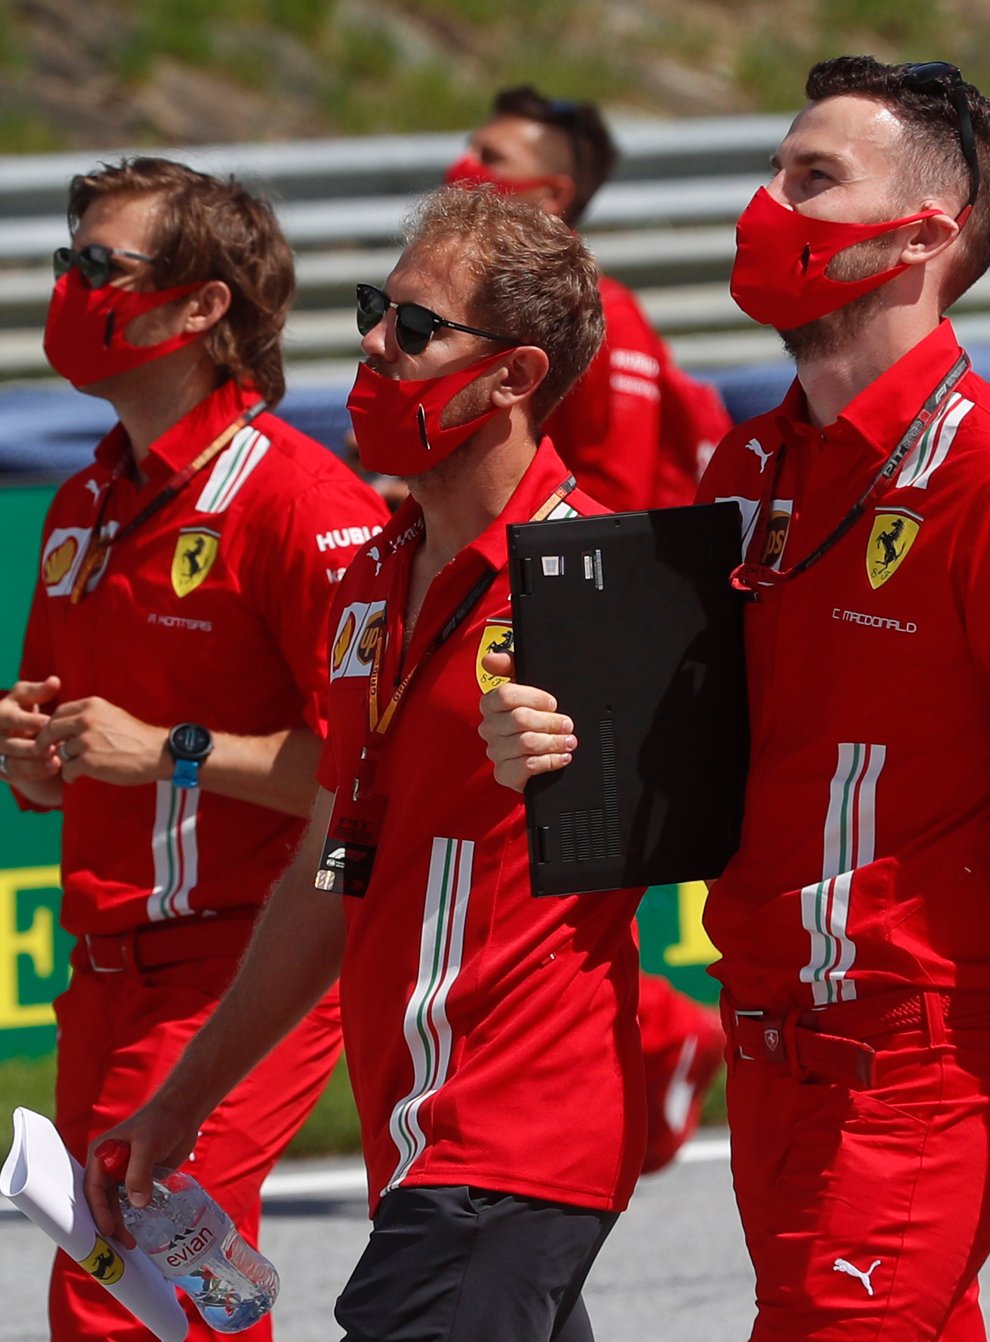 Drivers have been wearing masks in Austria